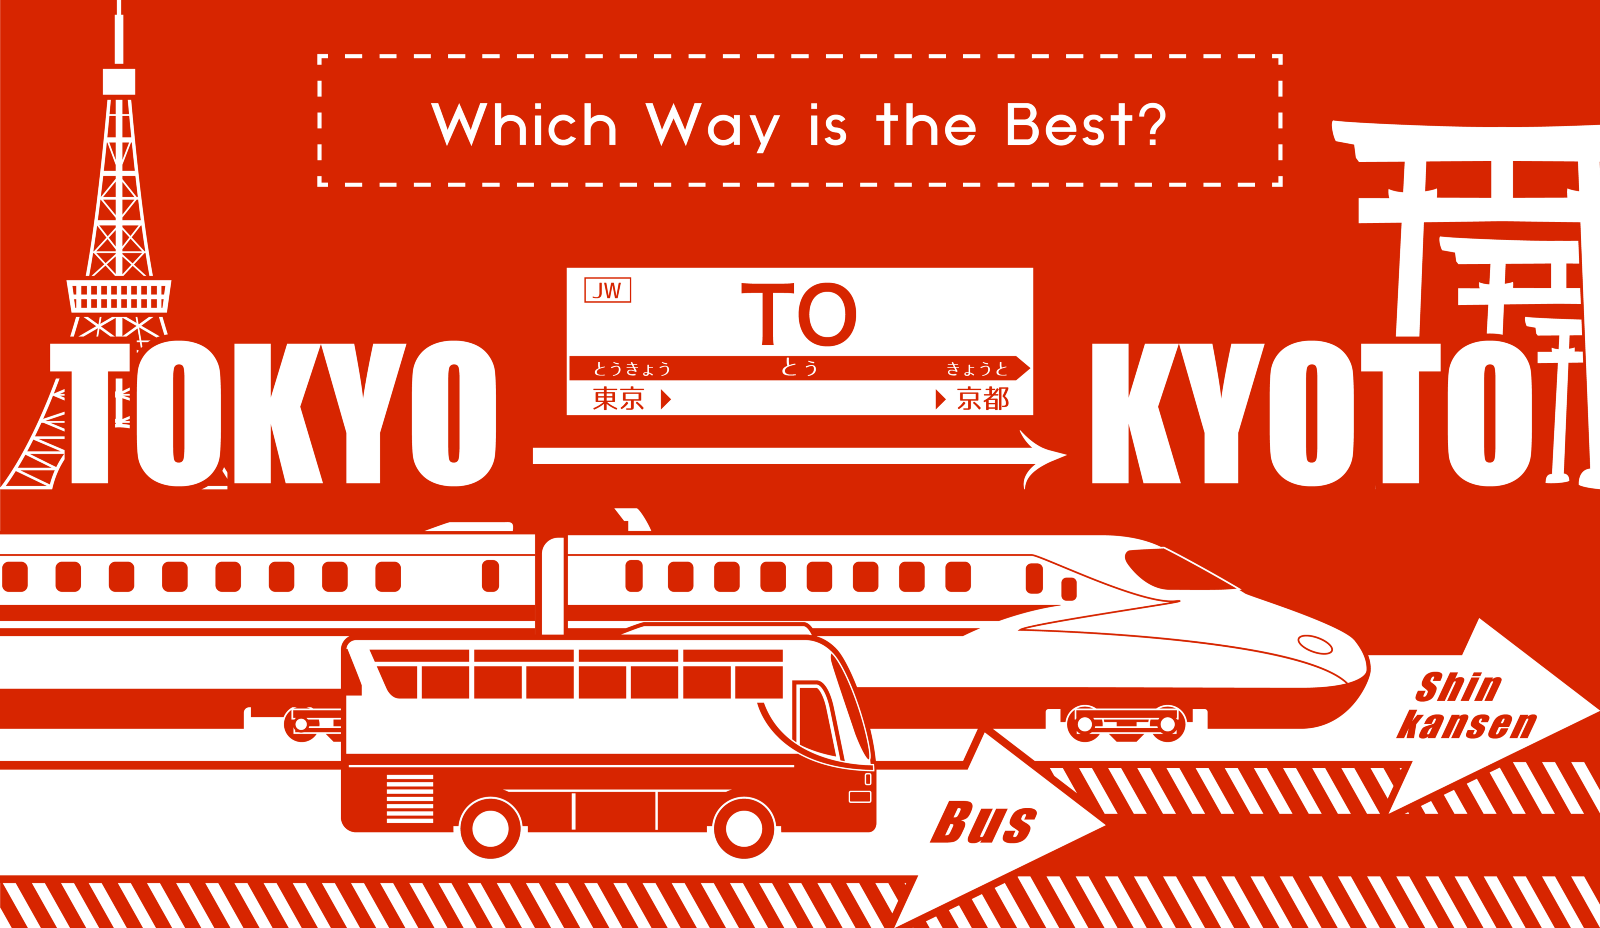 How to Get to Kyoto from Tokyo